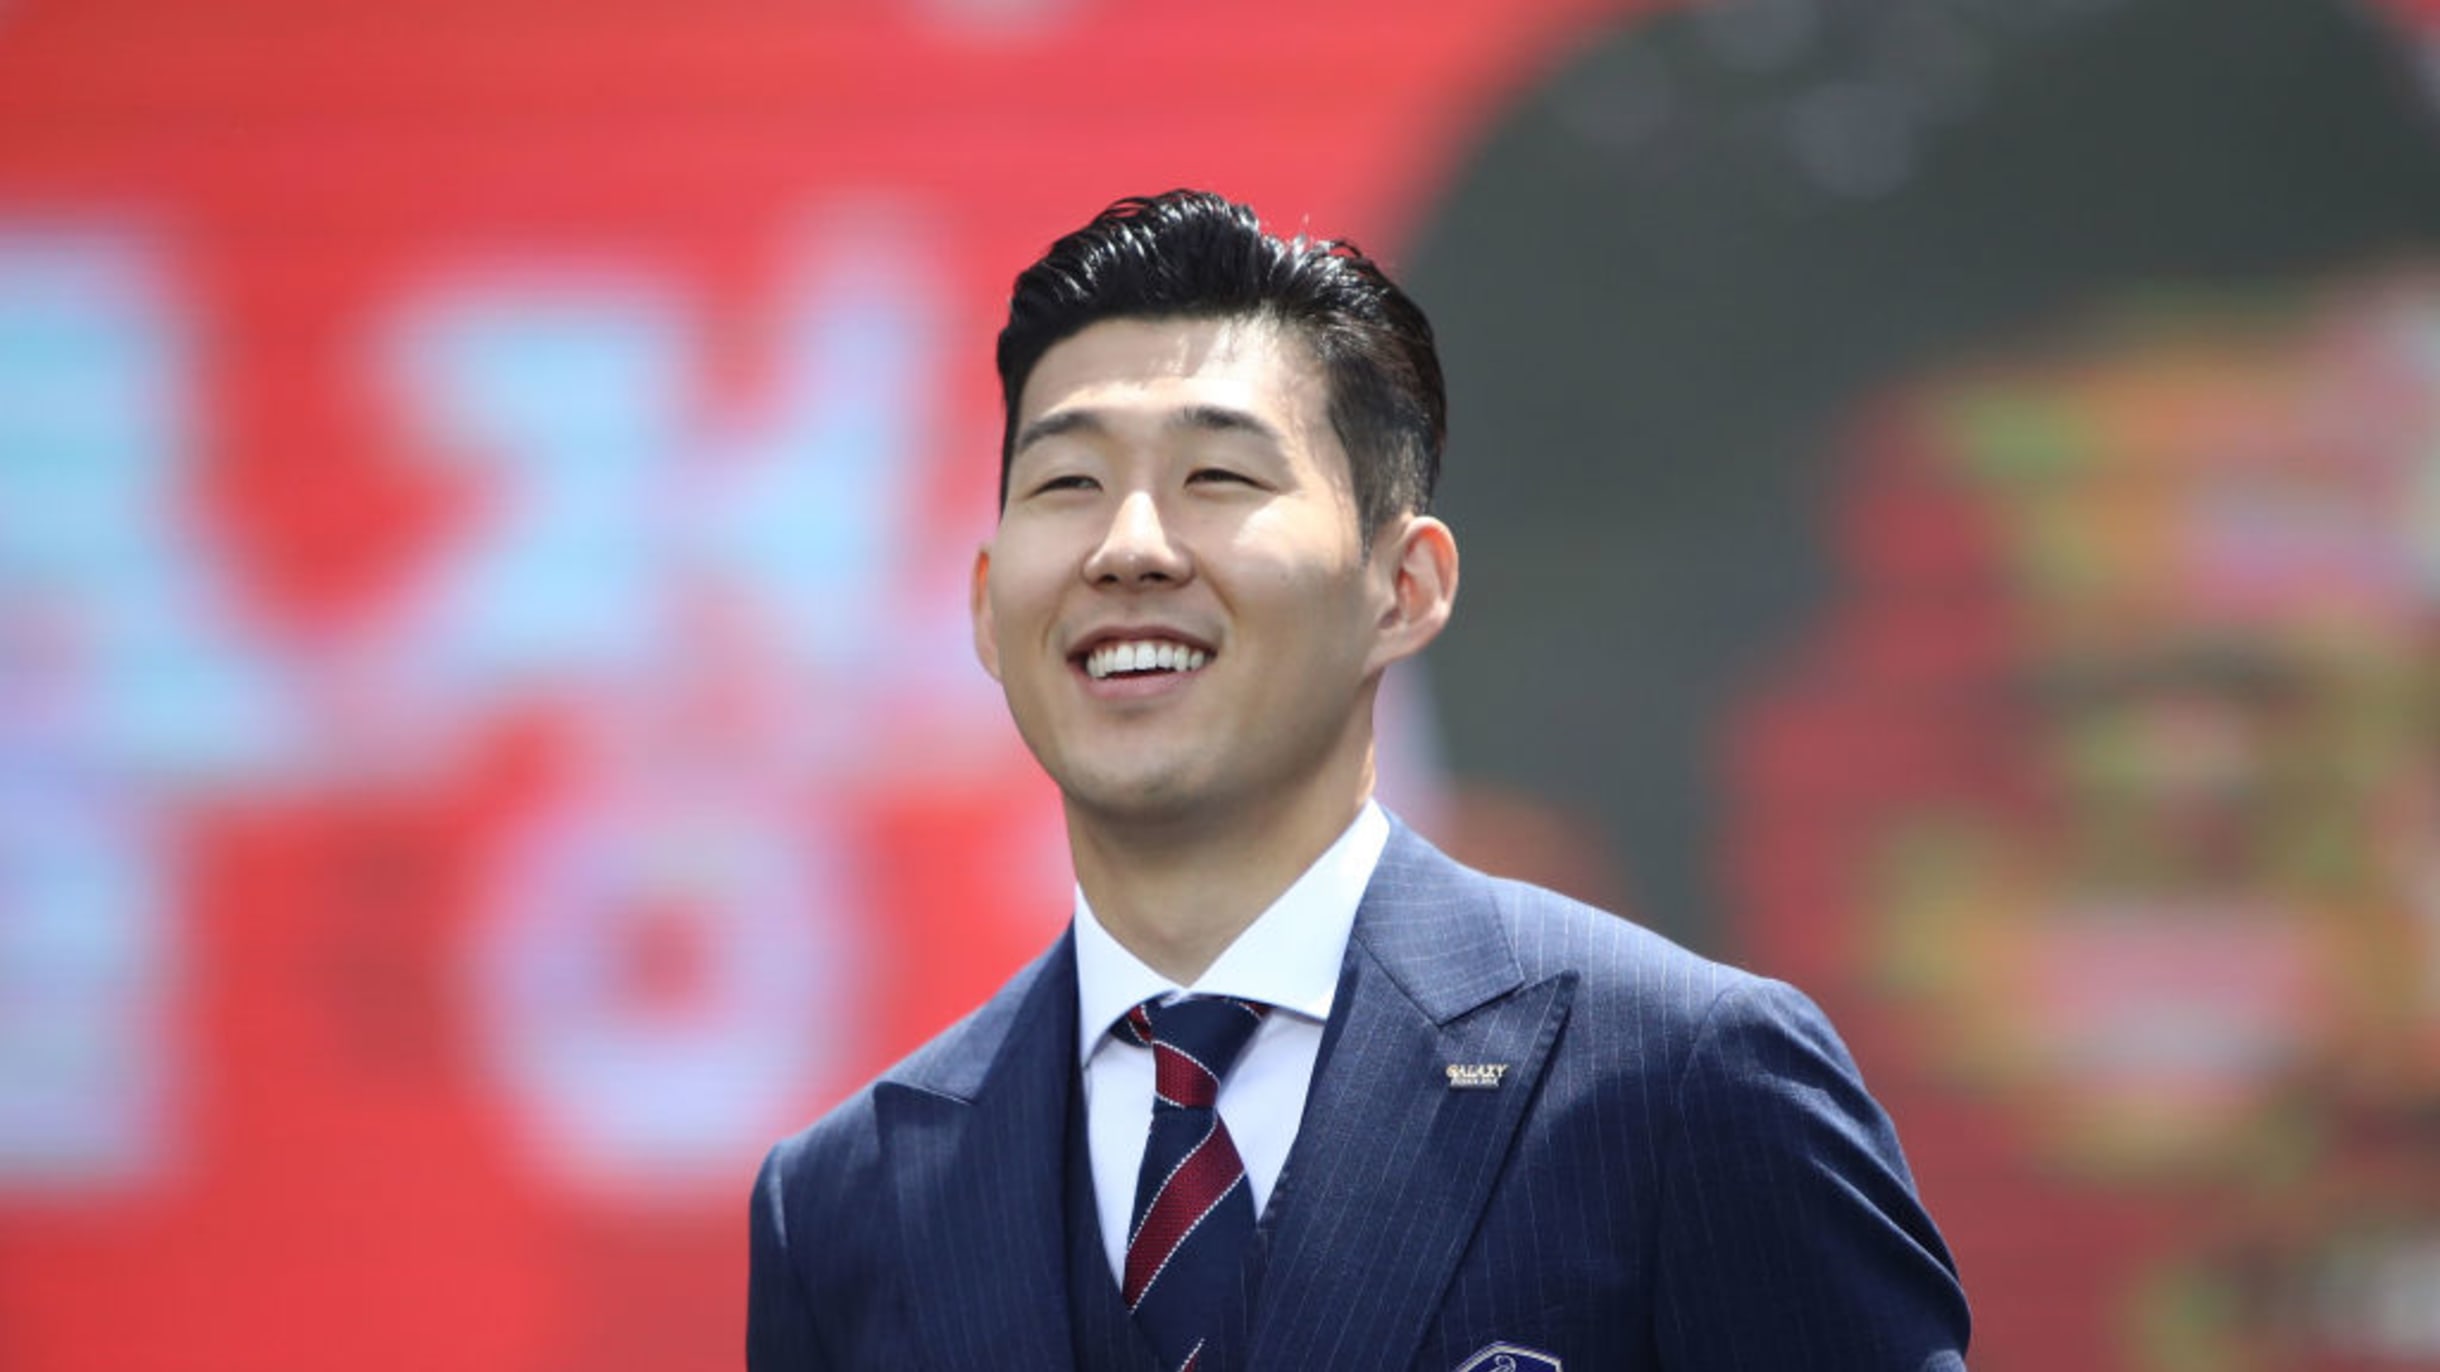 Spurs star Son told by his own father he needs 'top club' move to